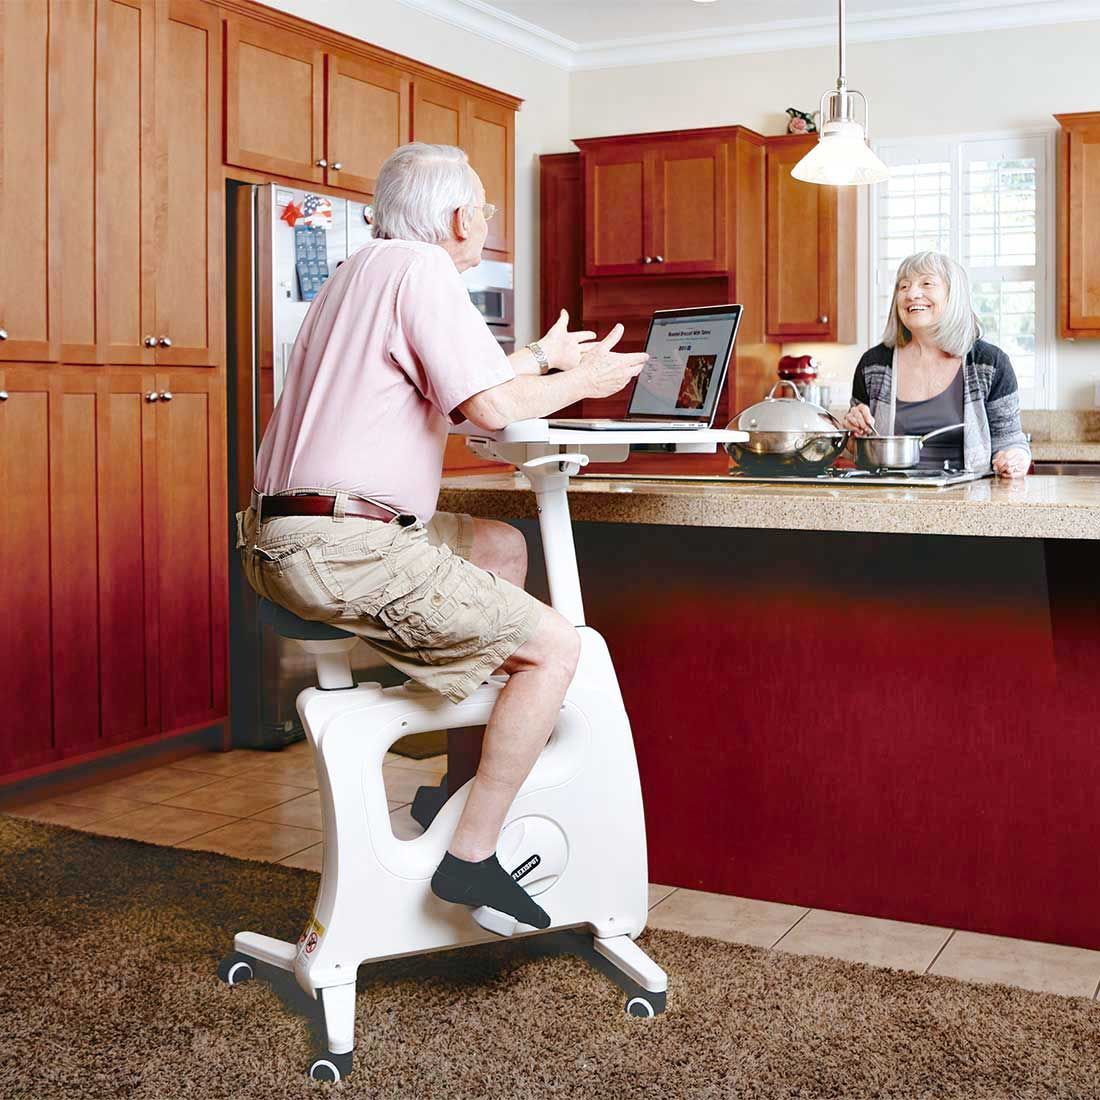 An old man wearing a pink shirt and khaki shorts sitting on a white Exercise Bike Desk